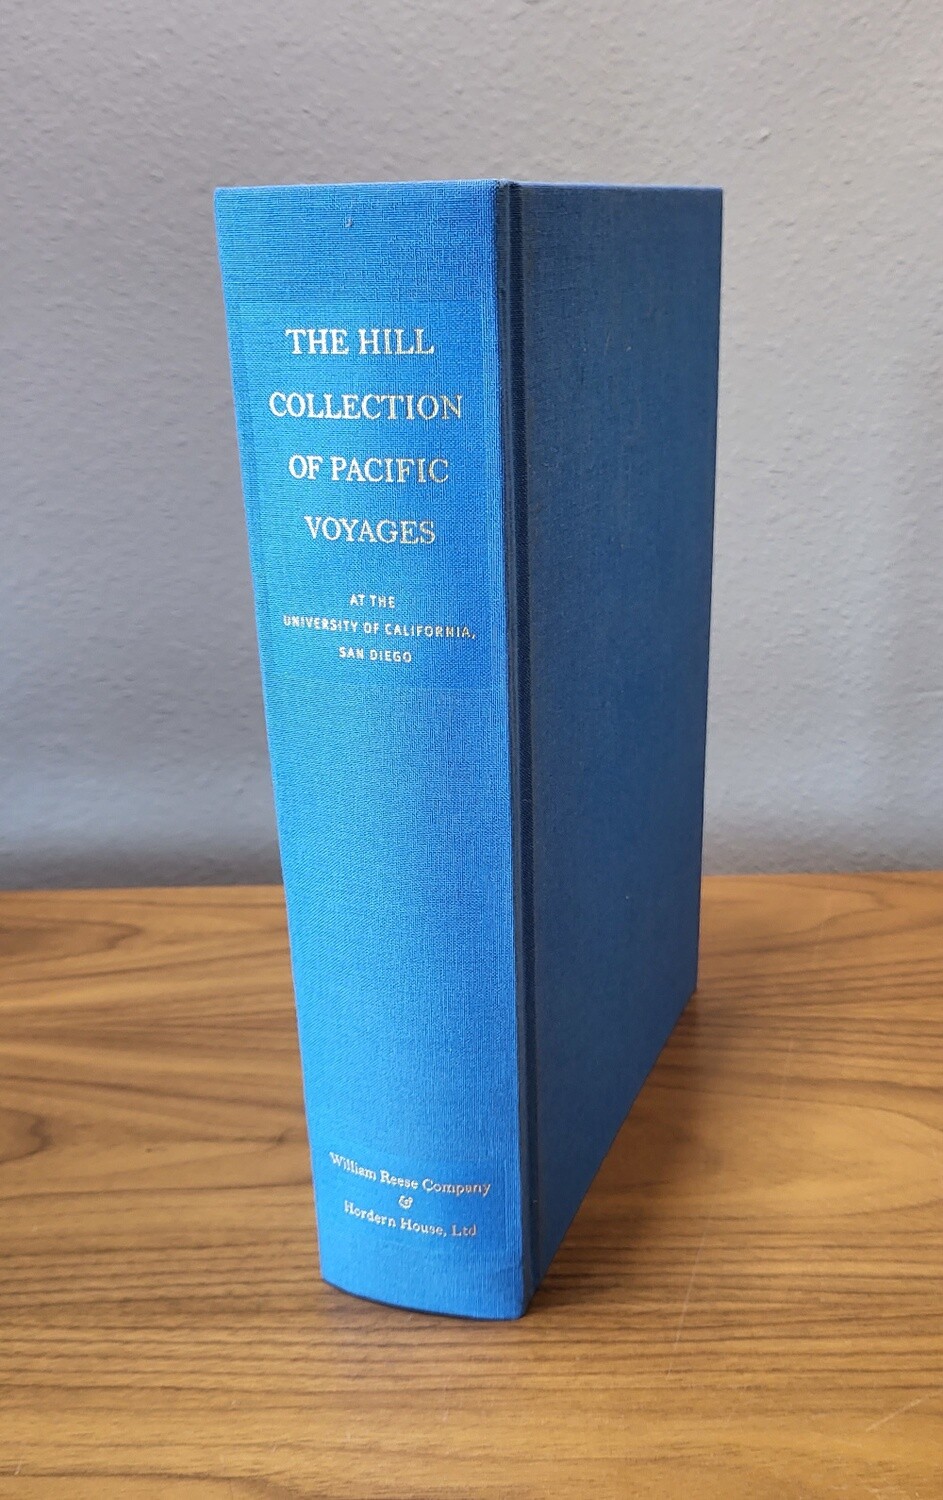 The Hill Collection Of Pacific Voyages at the University of California, San Diego